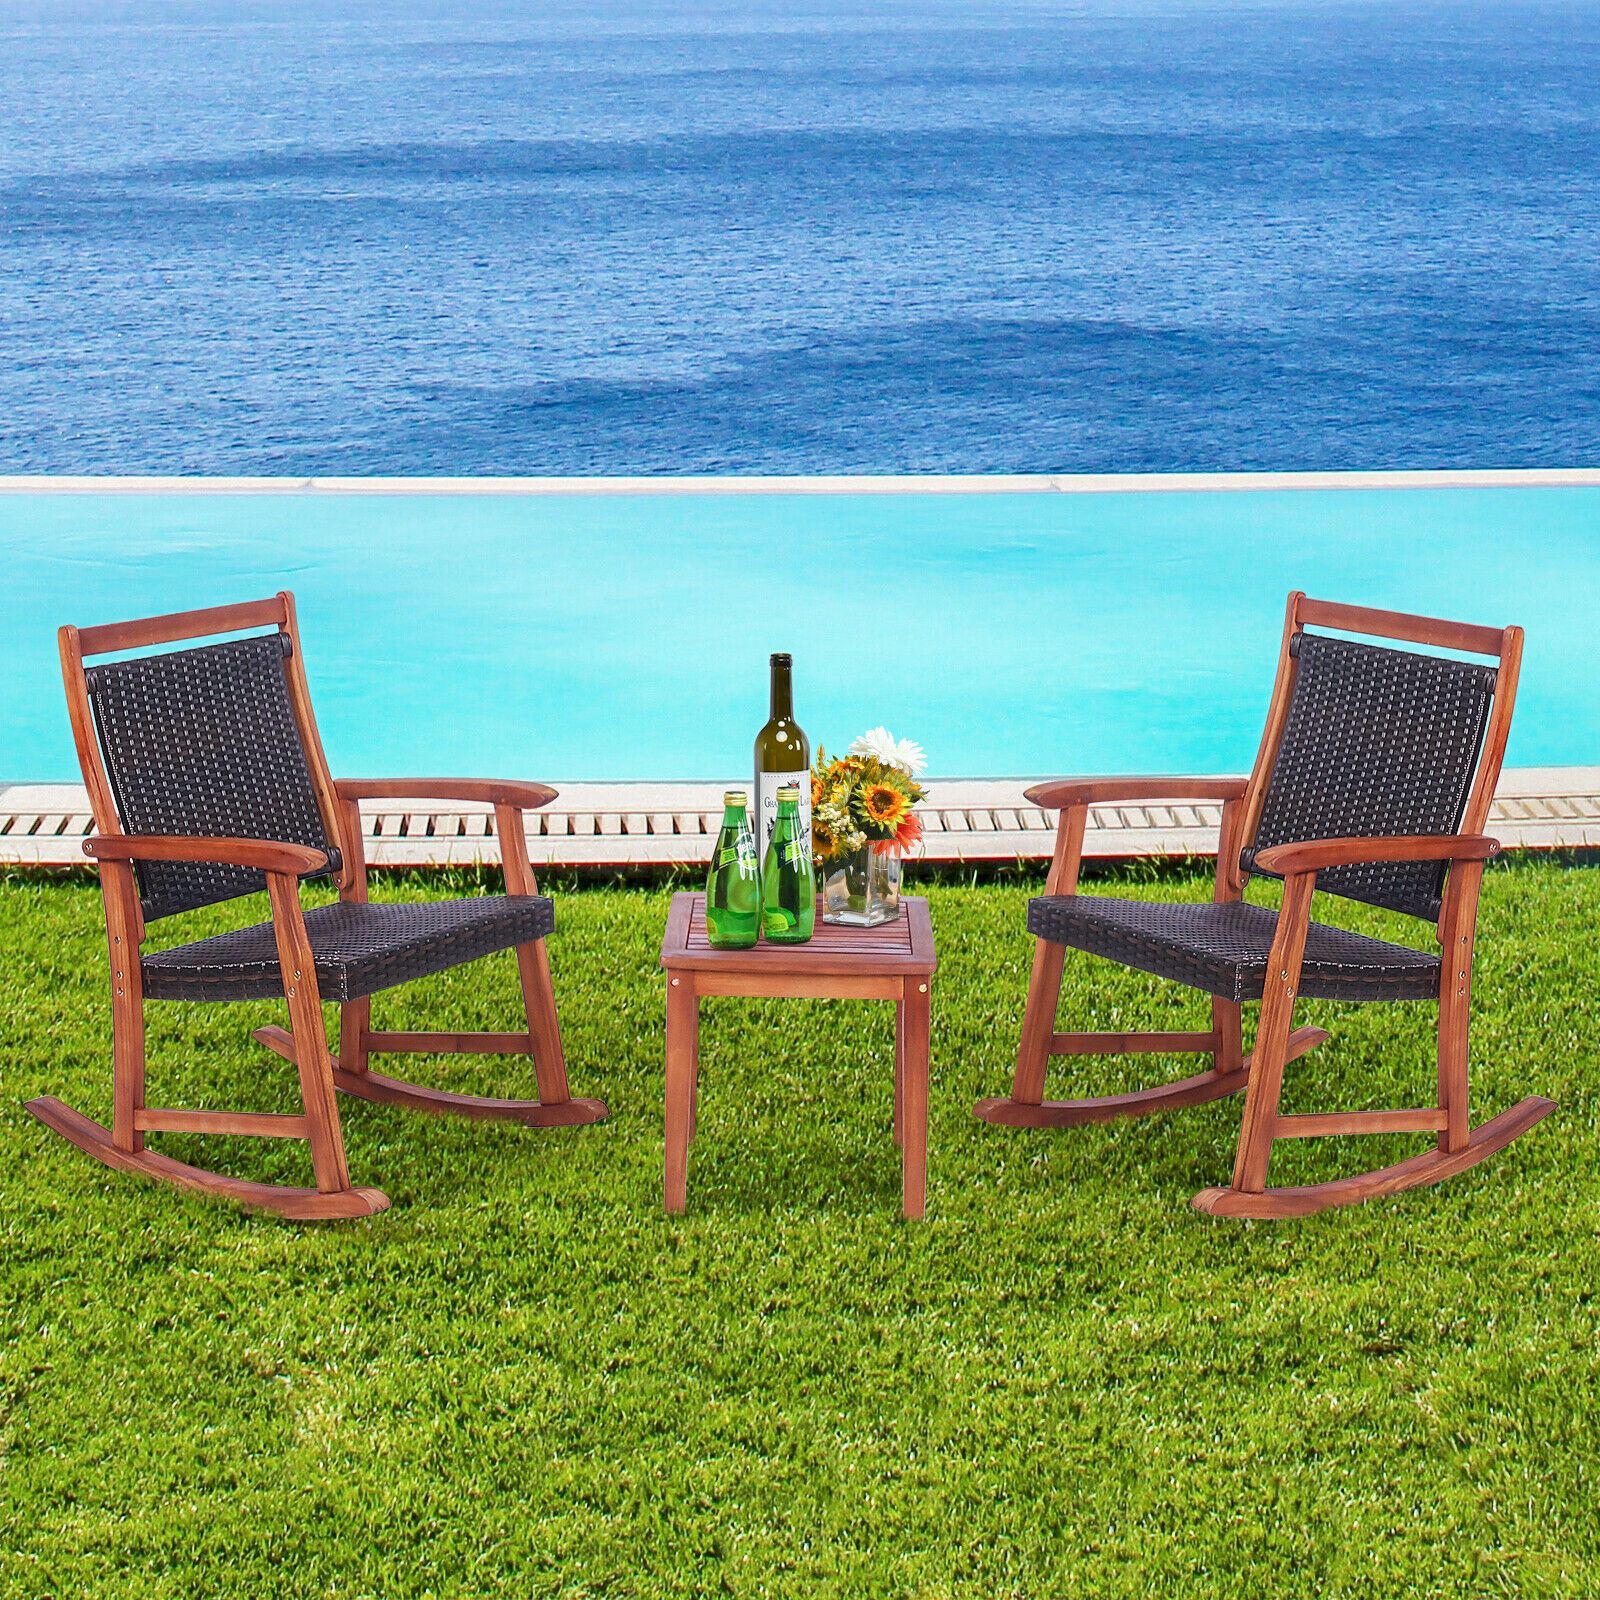 3 Piece Rattan Rocking Chair Set for Outdoor